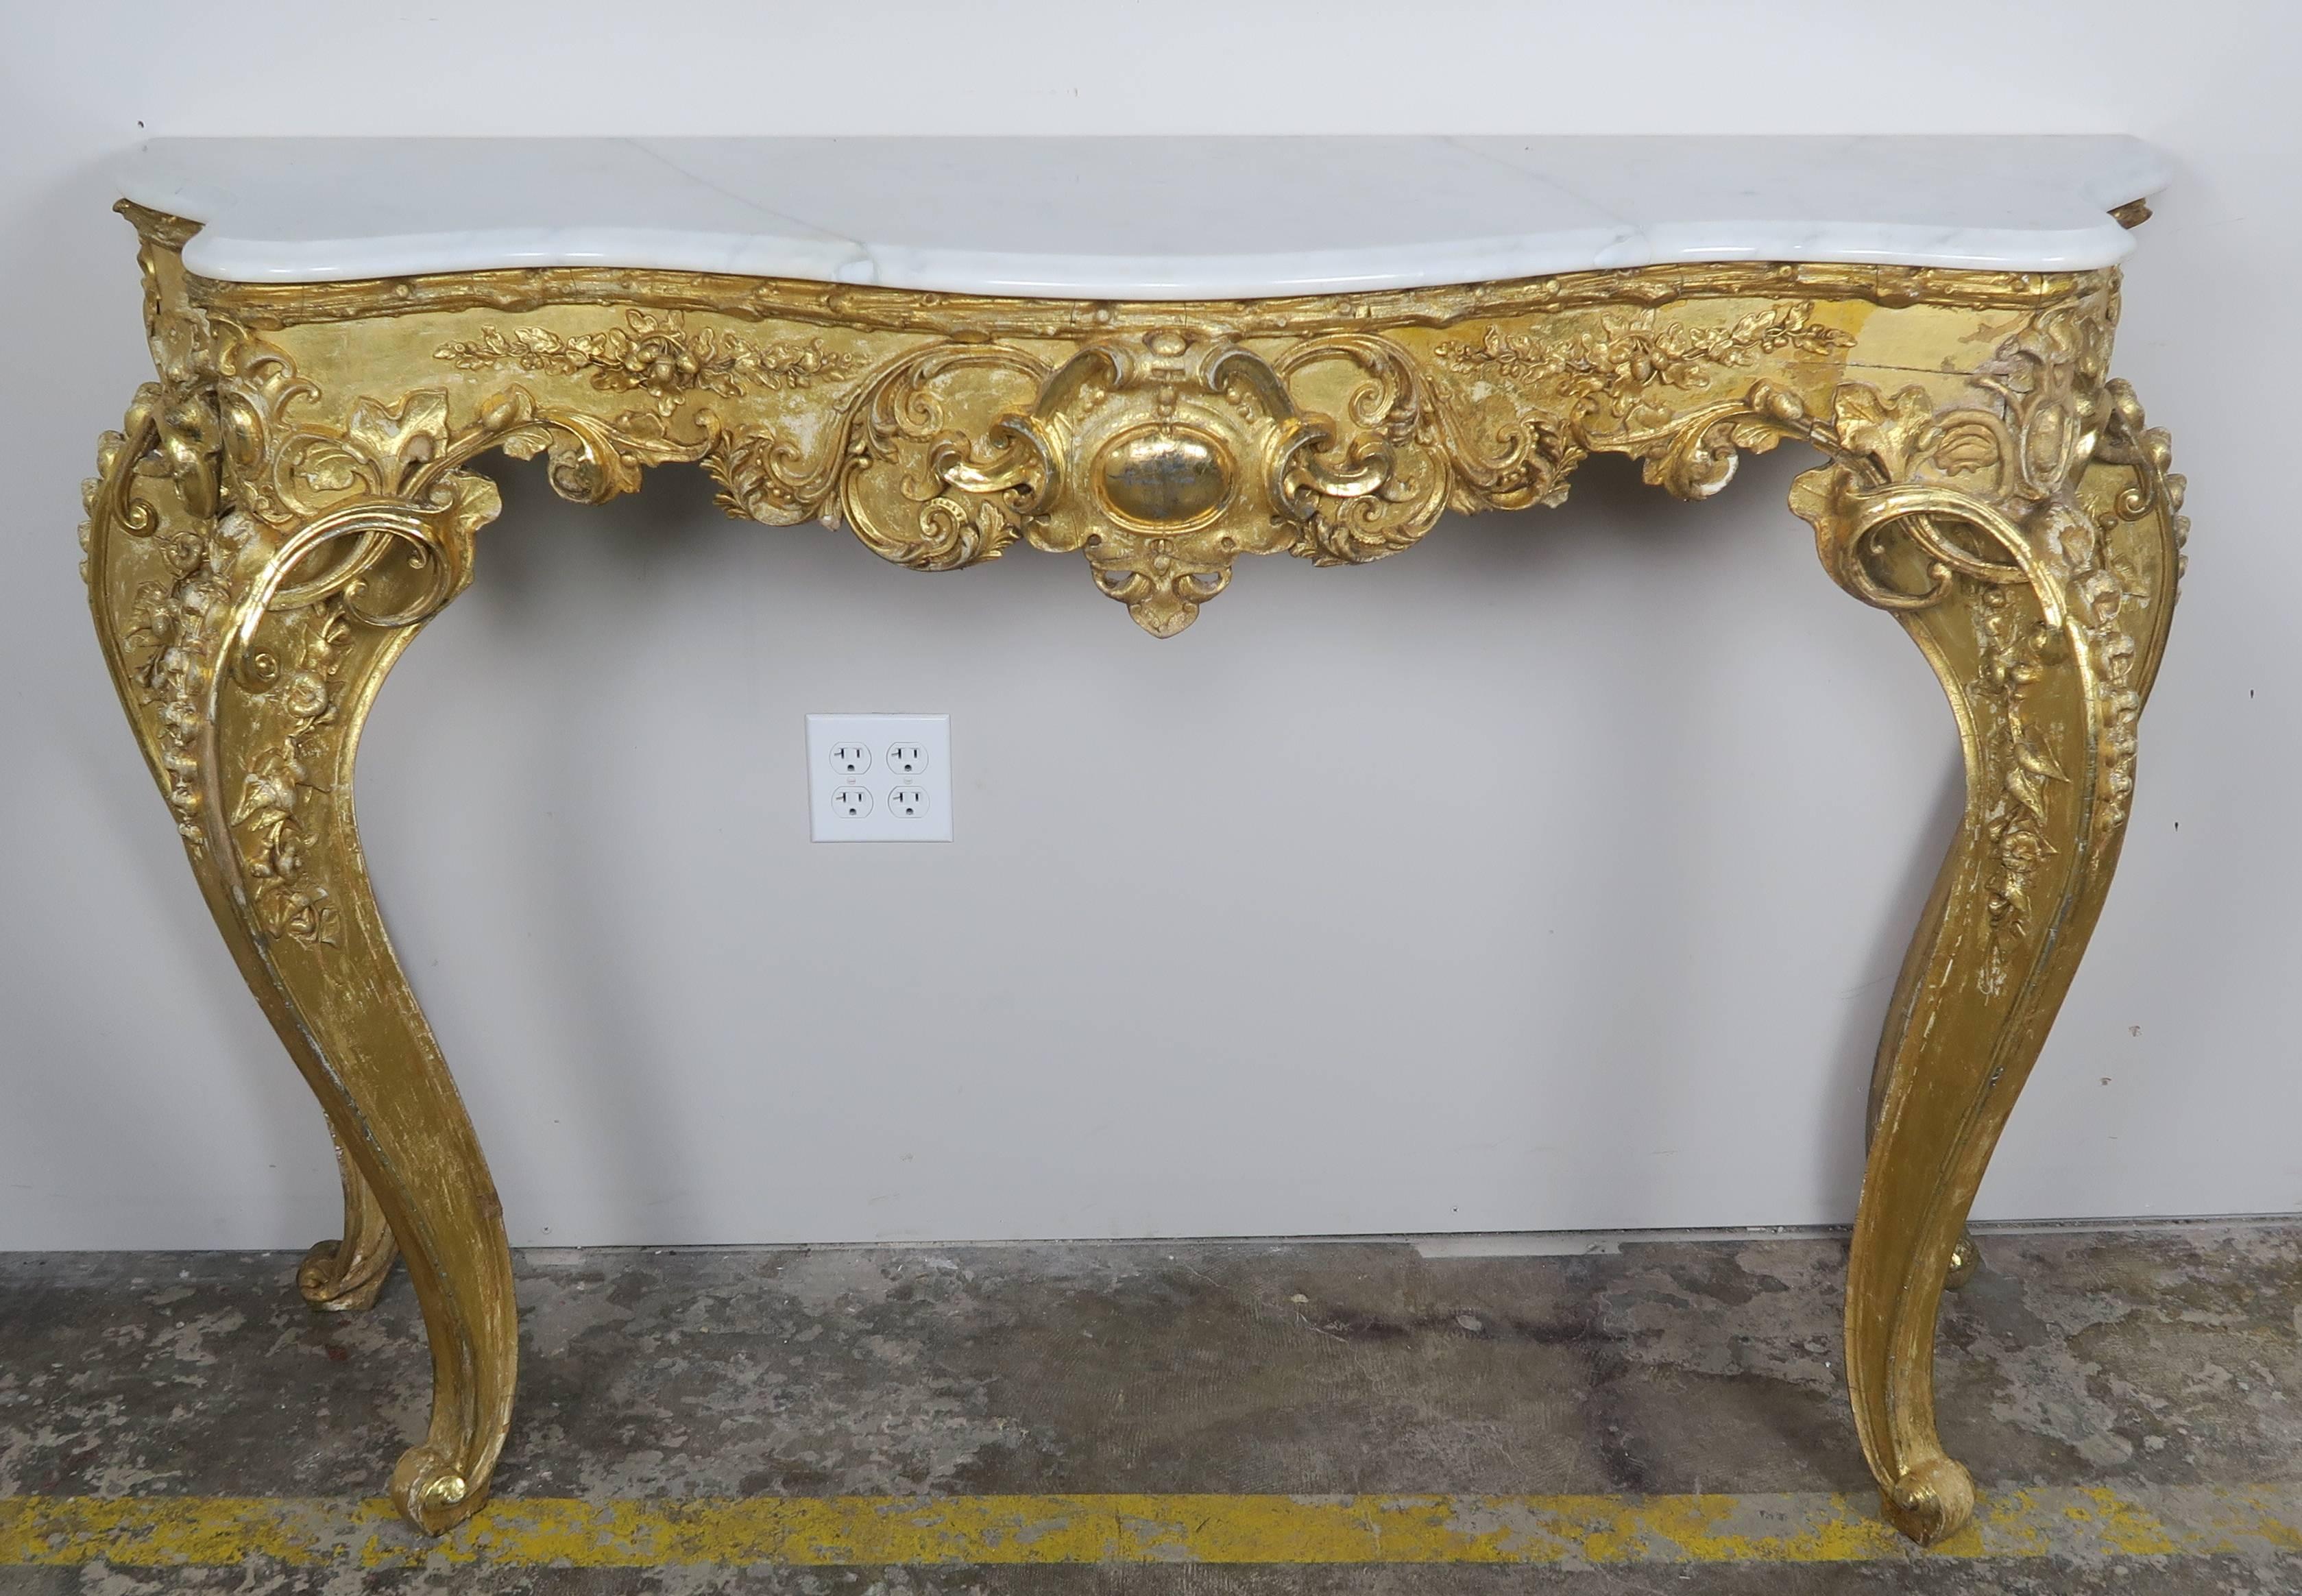 19th century French giltwood carved console with Carrara marble top. The console stands on four cabriole legs. Fine carved details can be seen throughout the piece.